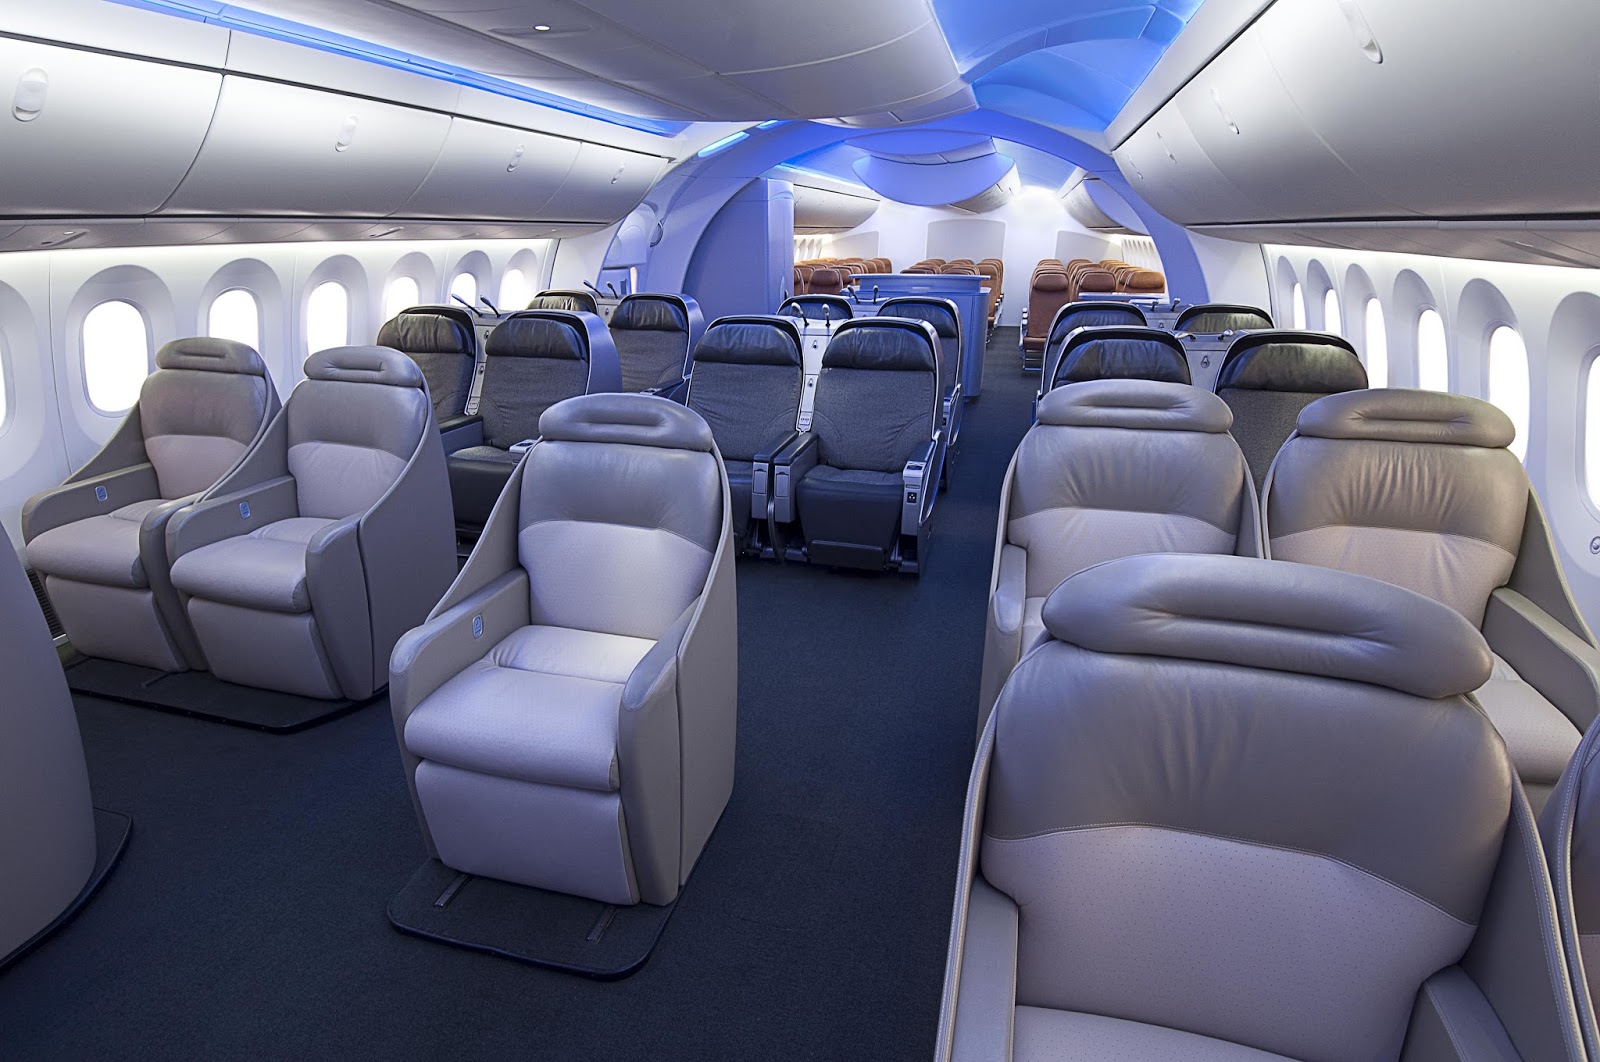 Boeing 787 HD Wallpapers, 787 interior photos